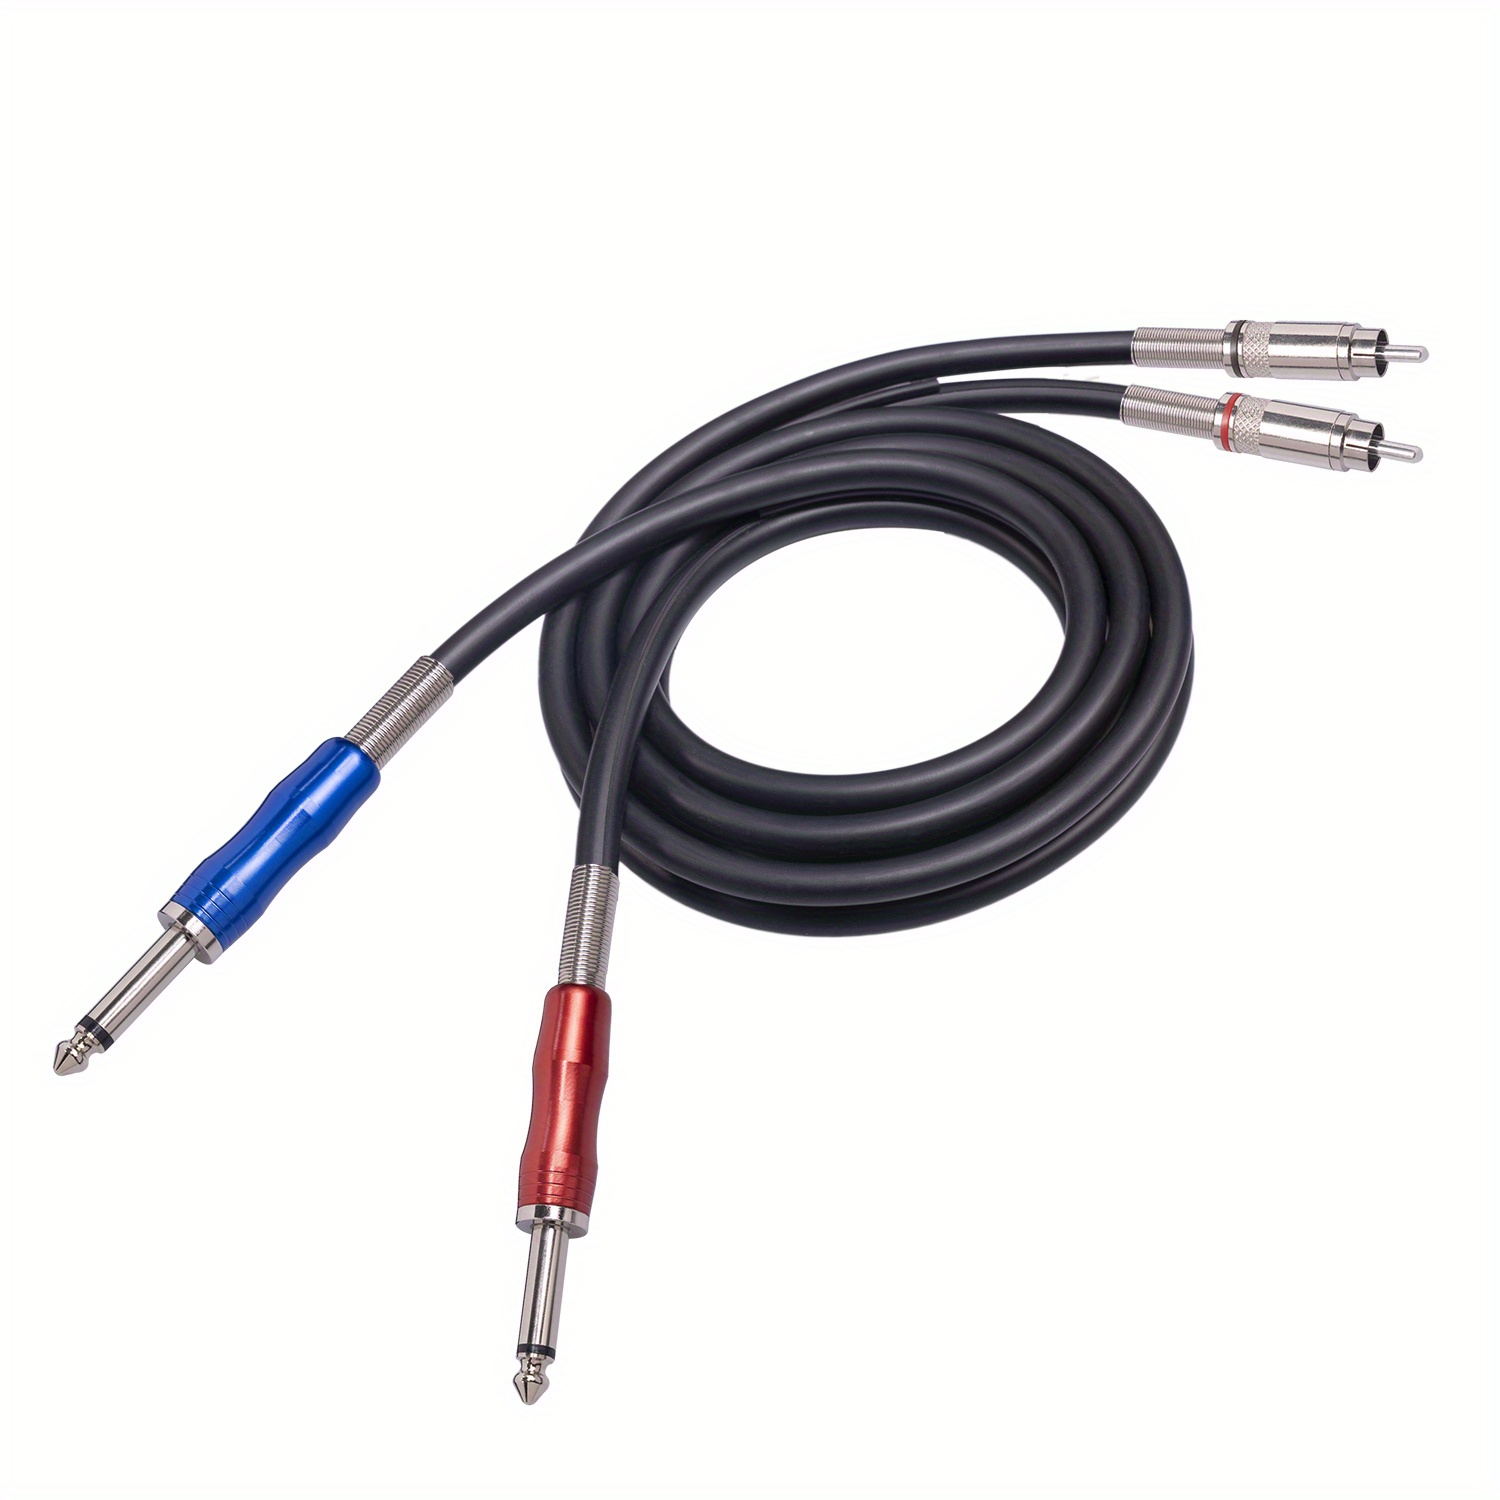 Double Jack 6.35 Mm 1/4 Inch Plug Double Rca Male Jack Audio Cable 1 Meter